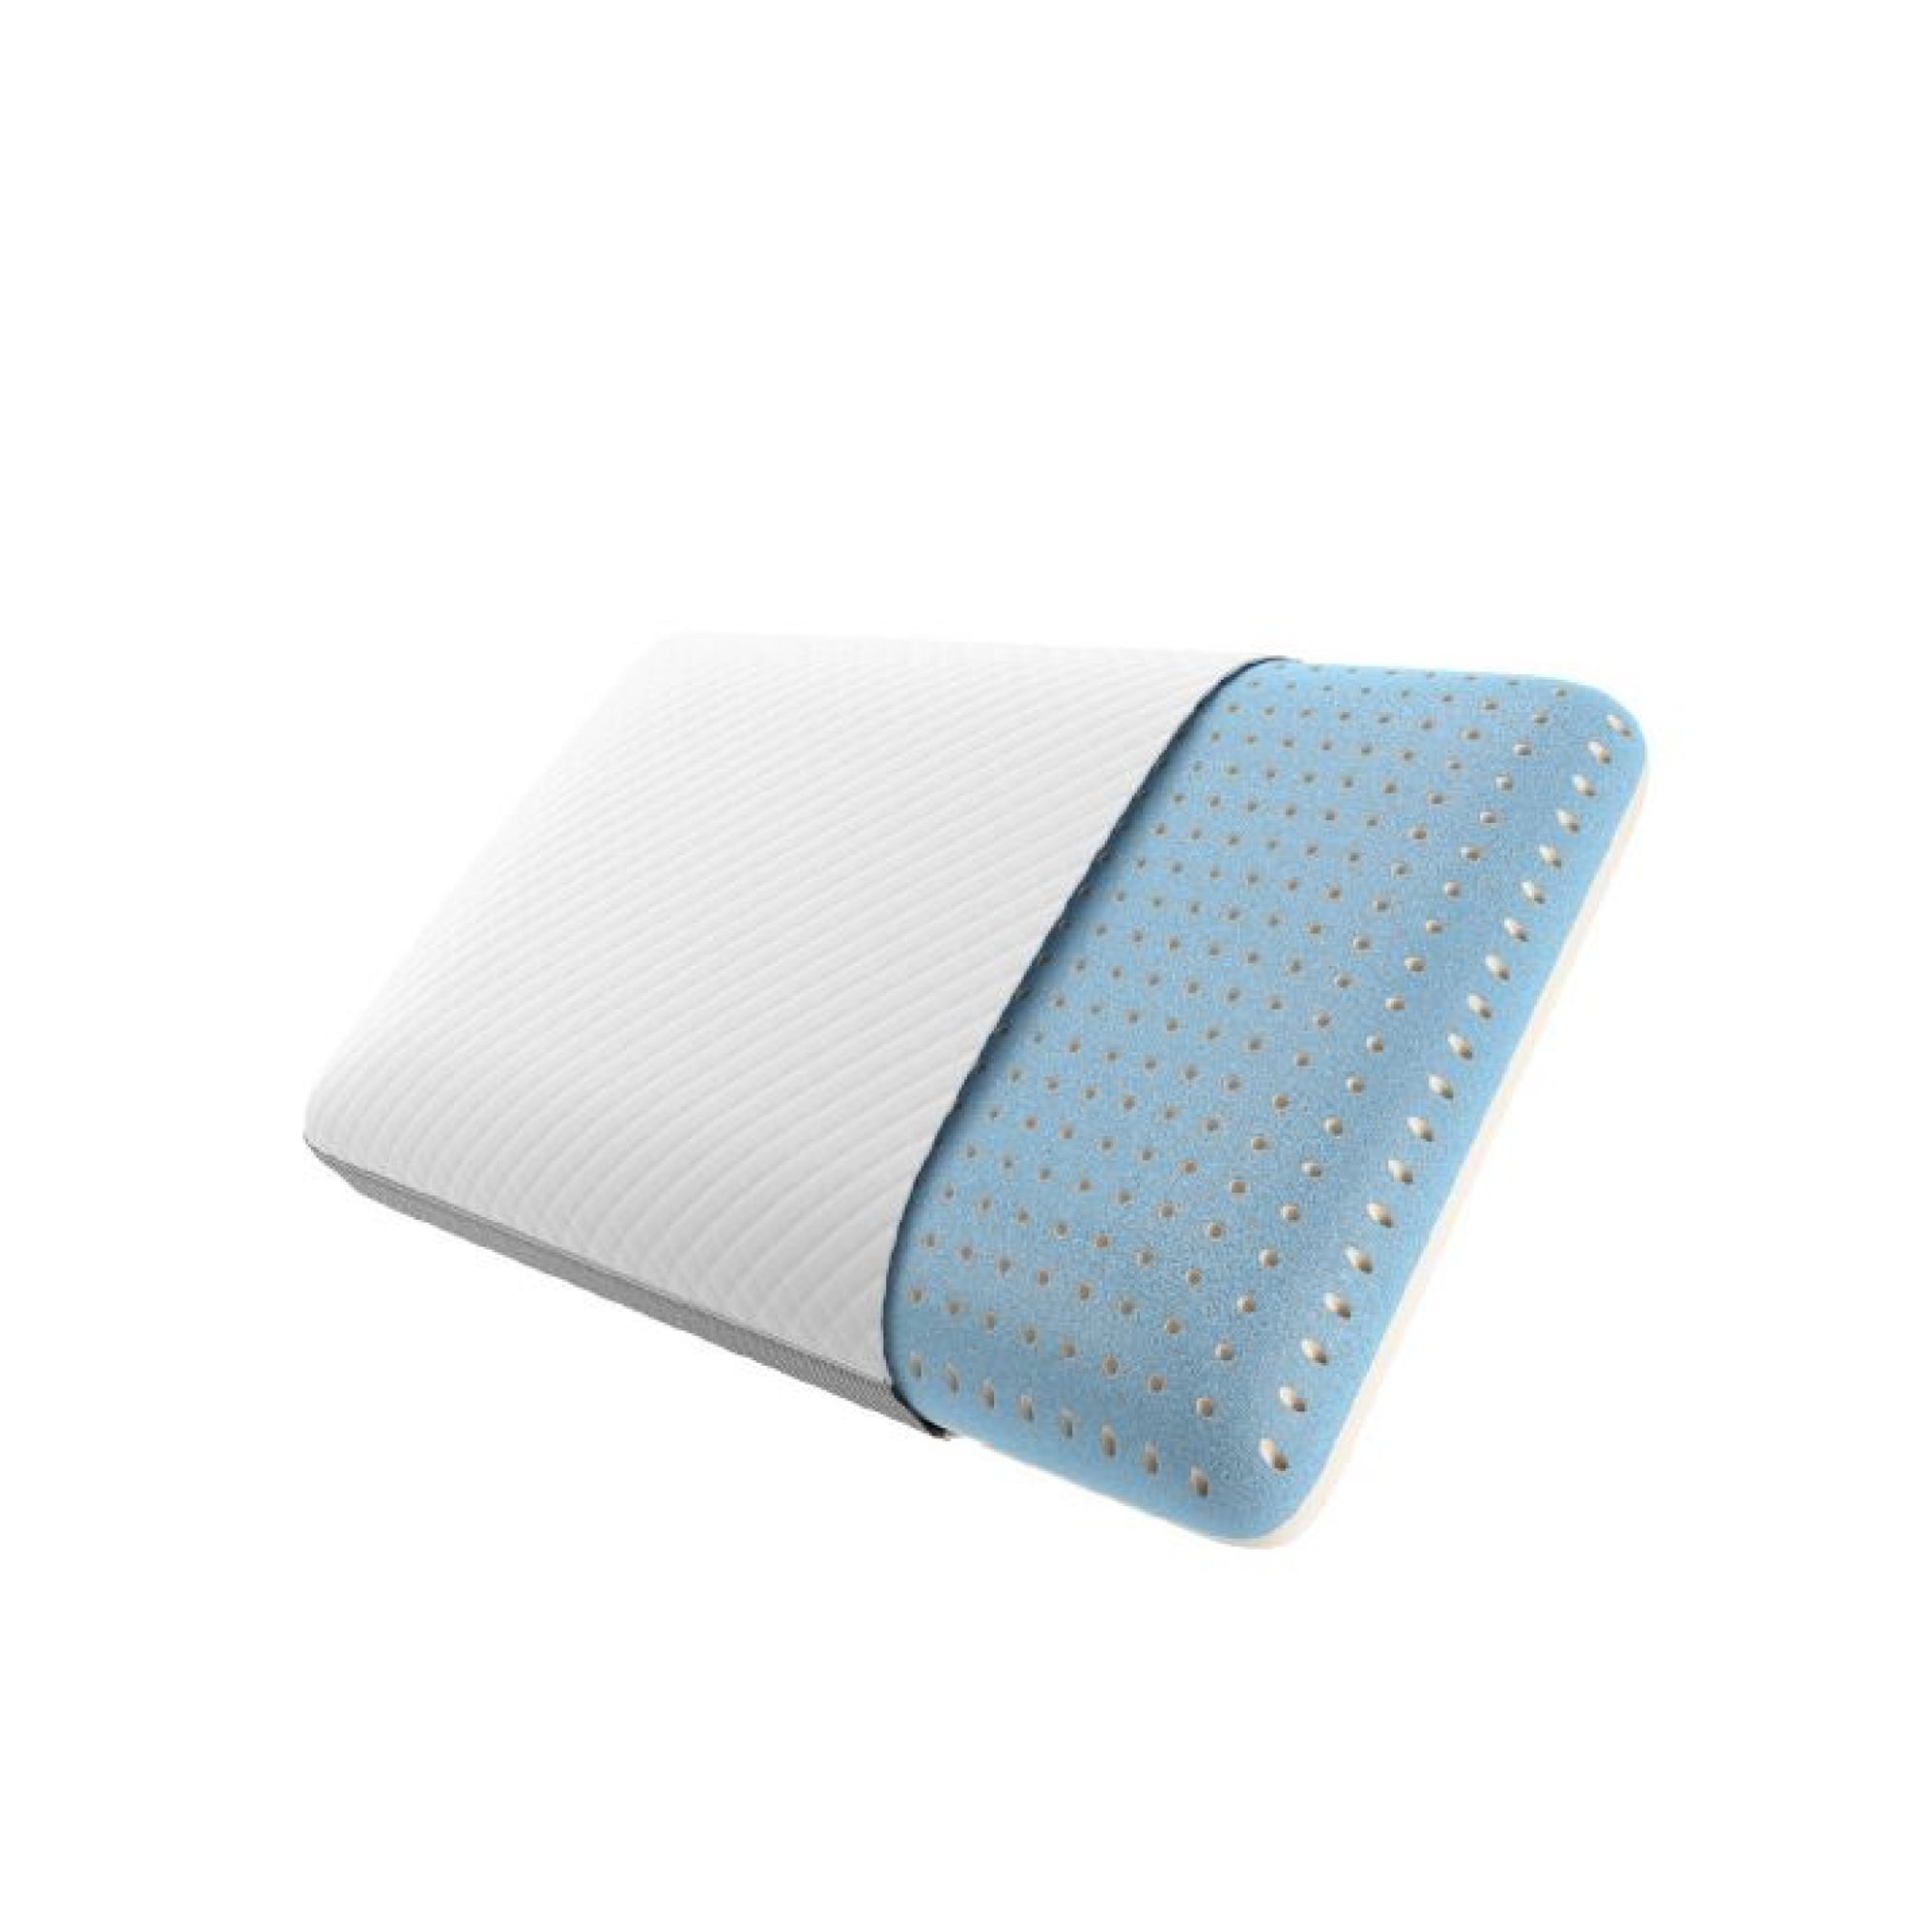 The Beautyrest Absolute Relaxation pillow showing inside material